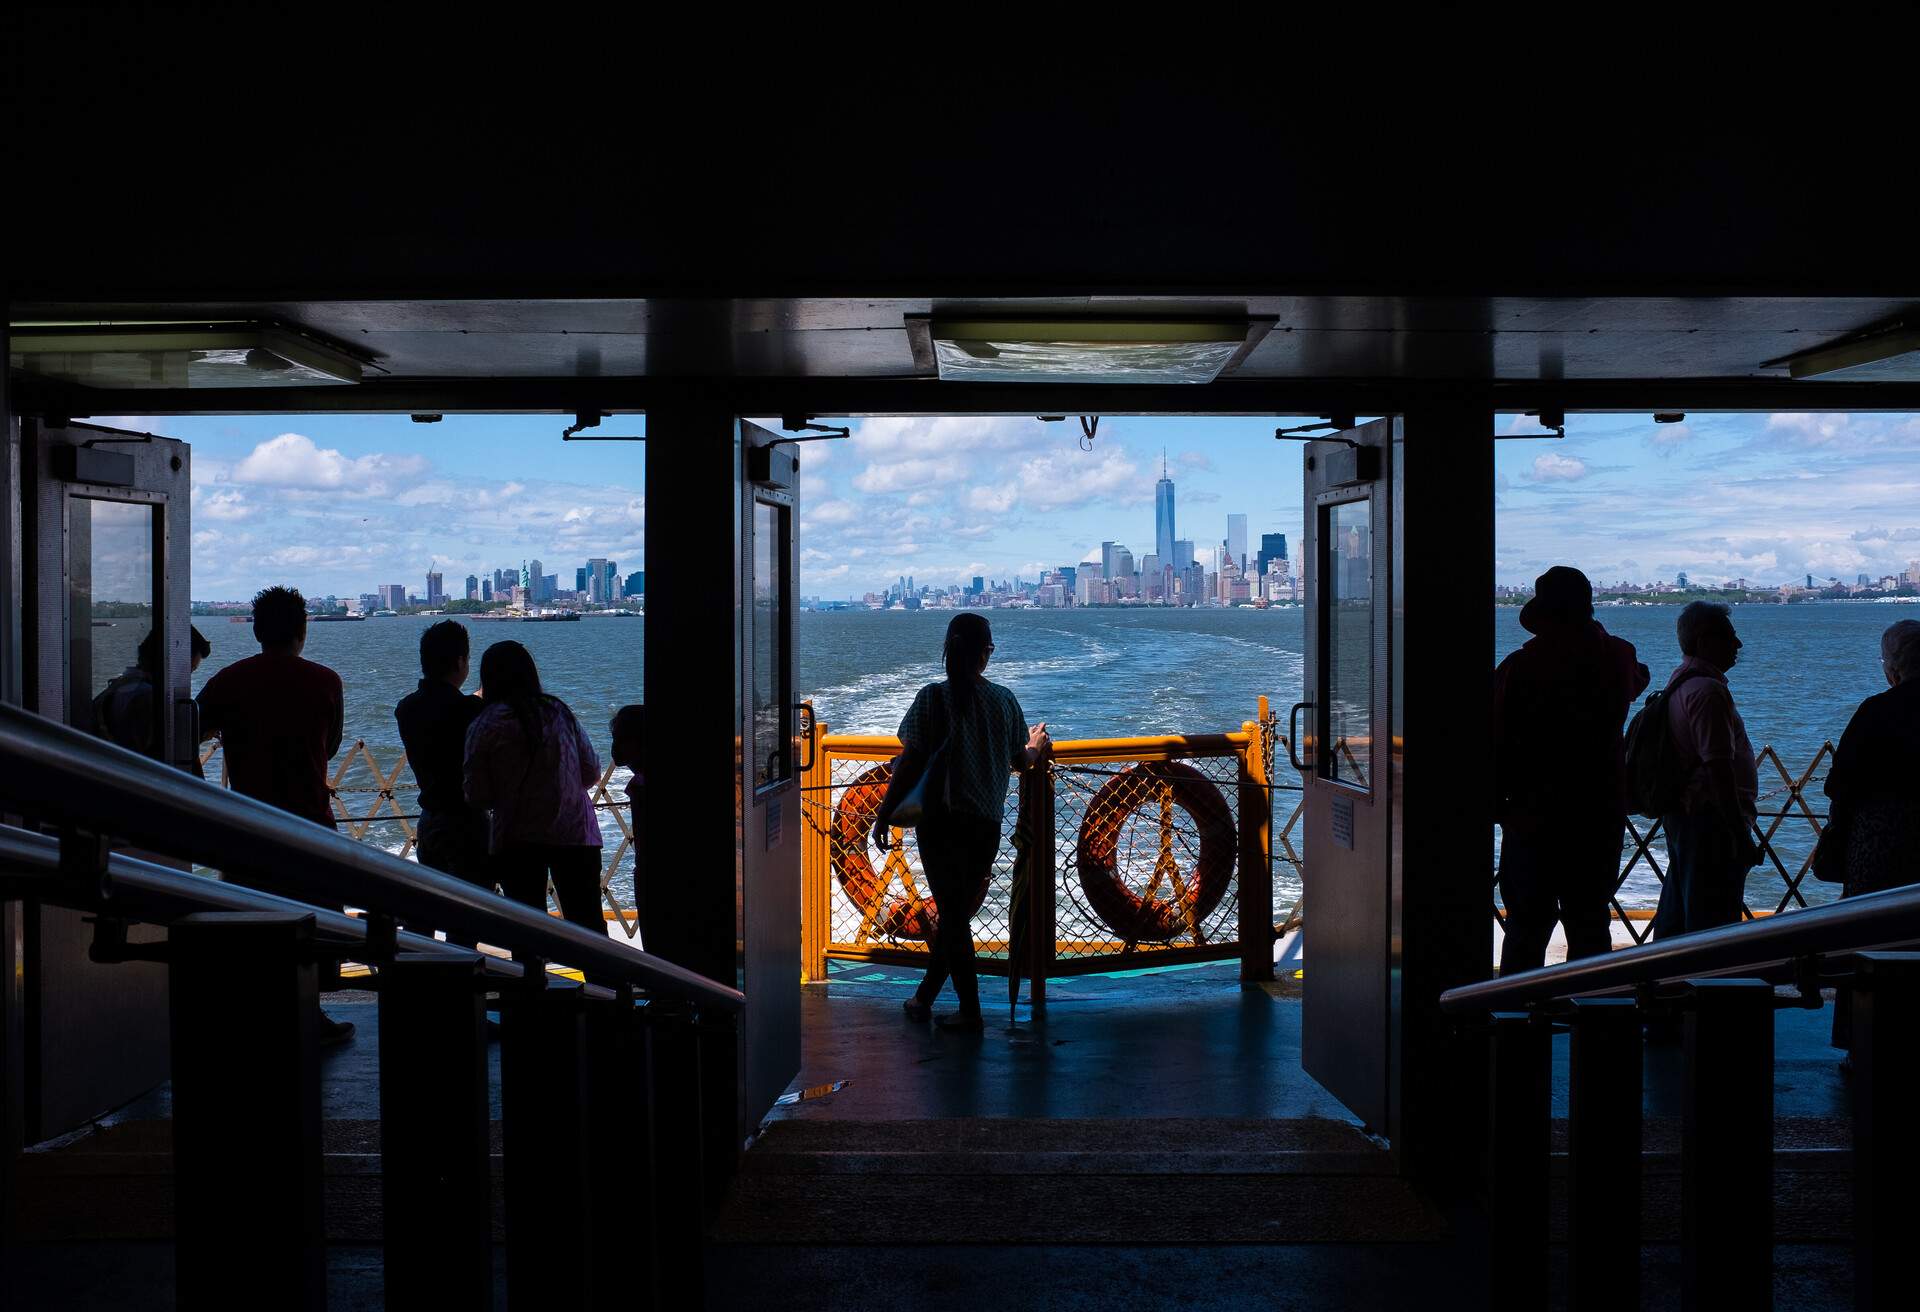 Silhouettes of passengers traveling from New York City aboard the Staten Island Ferry. The Manhattan skyline is seen through the windows in the distance.